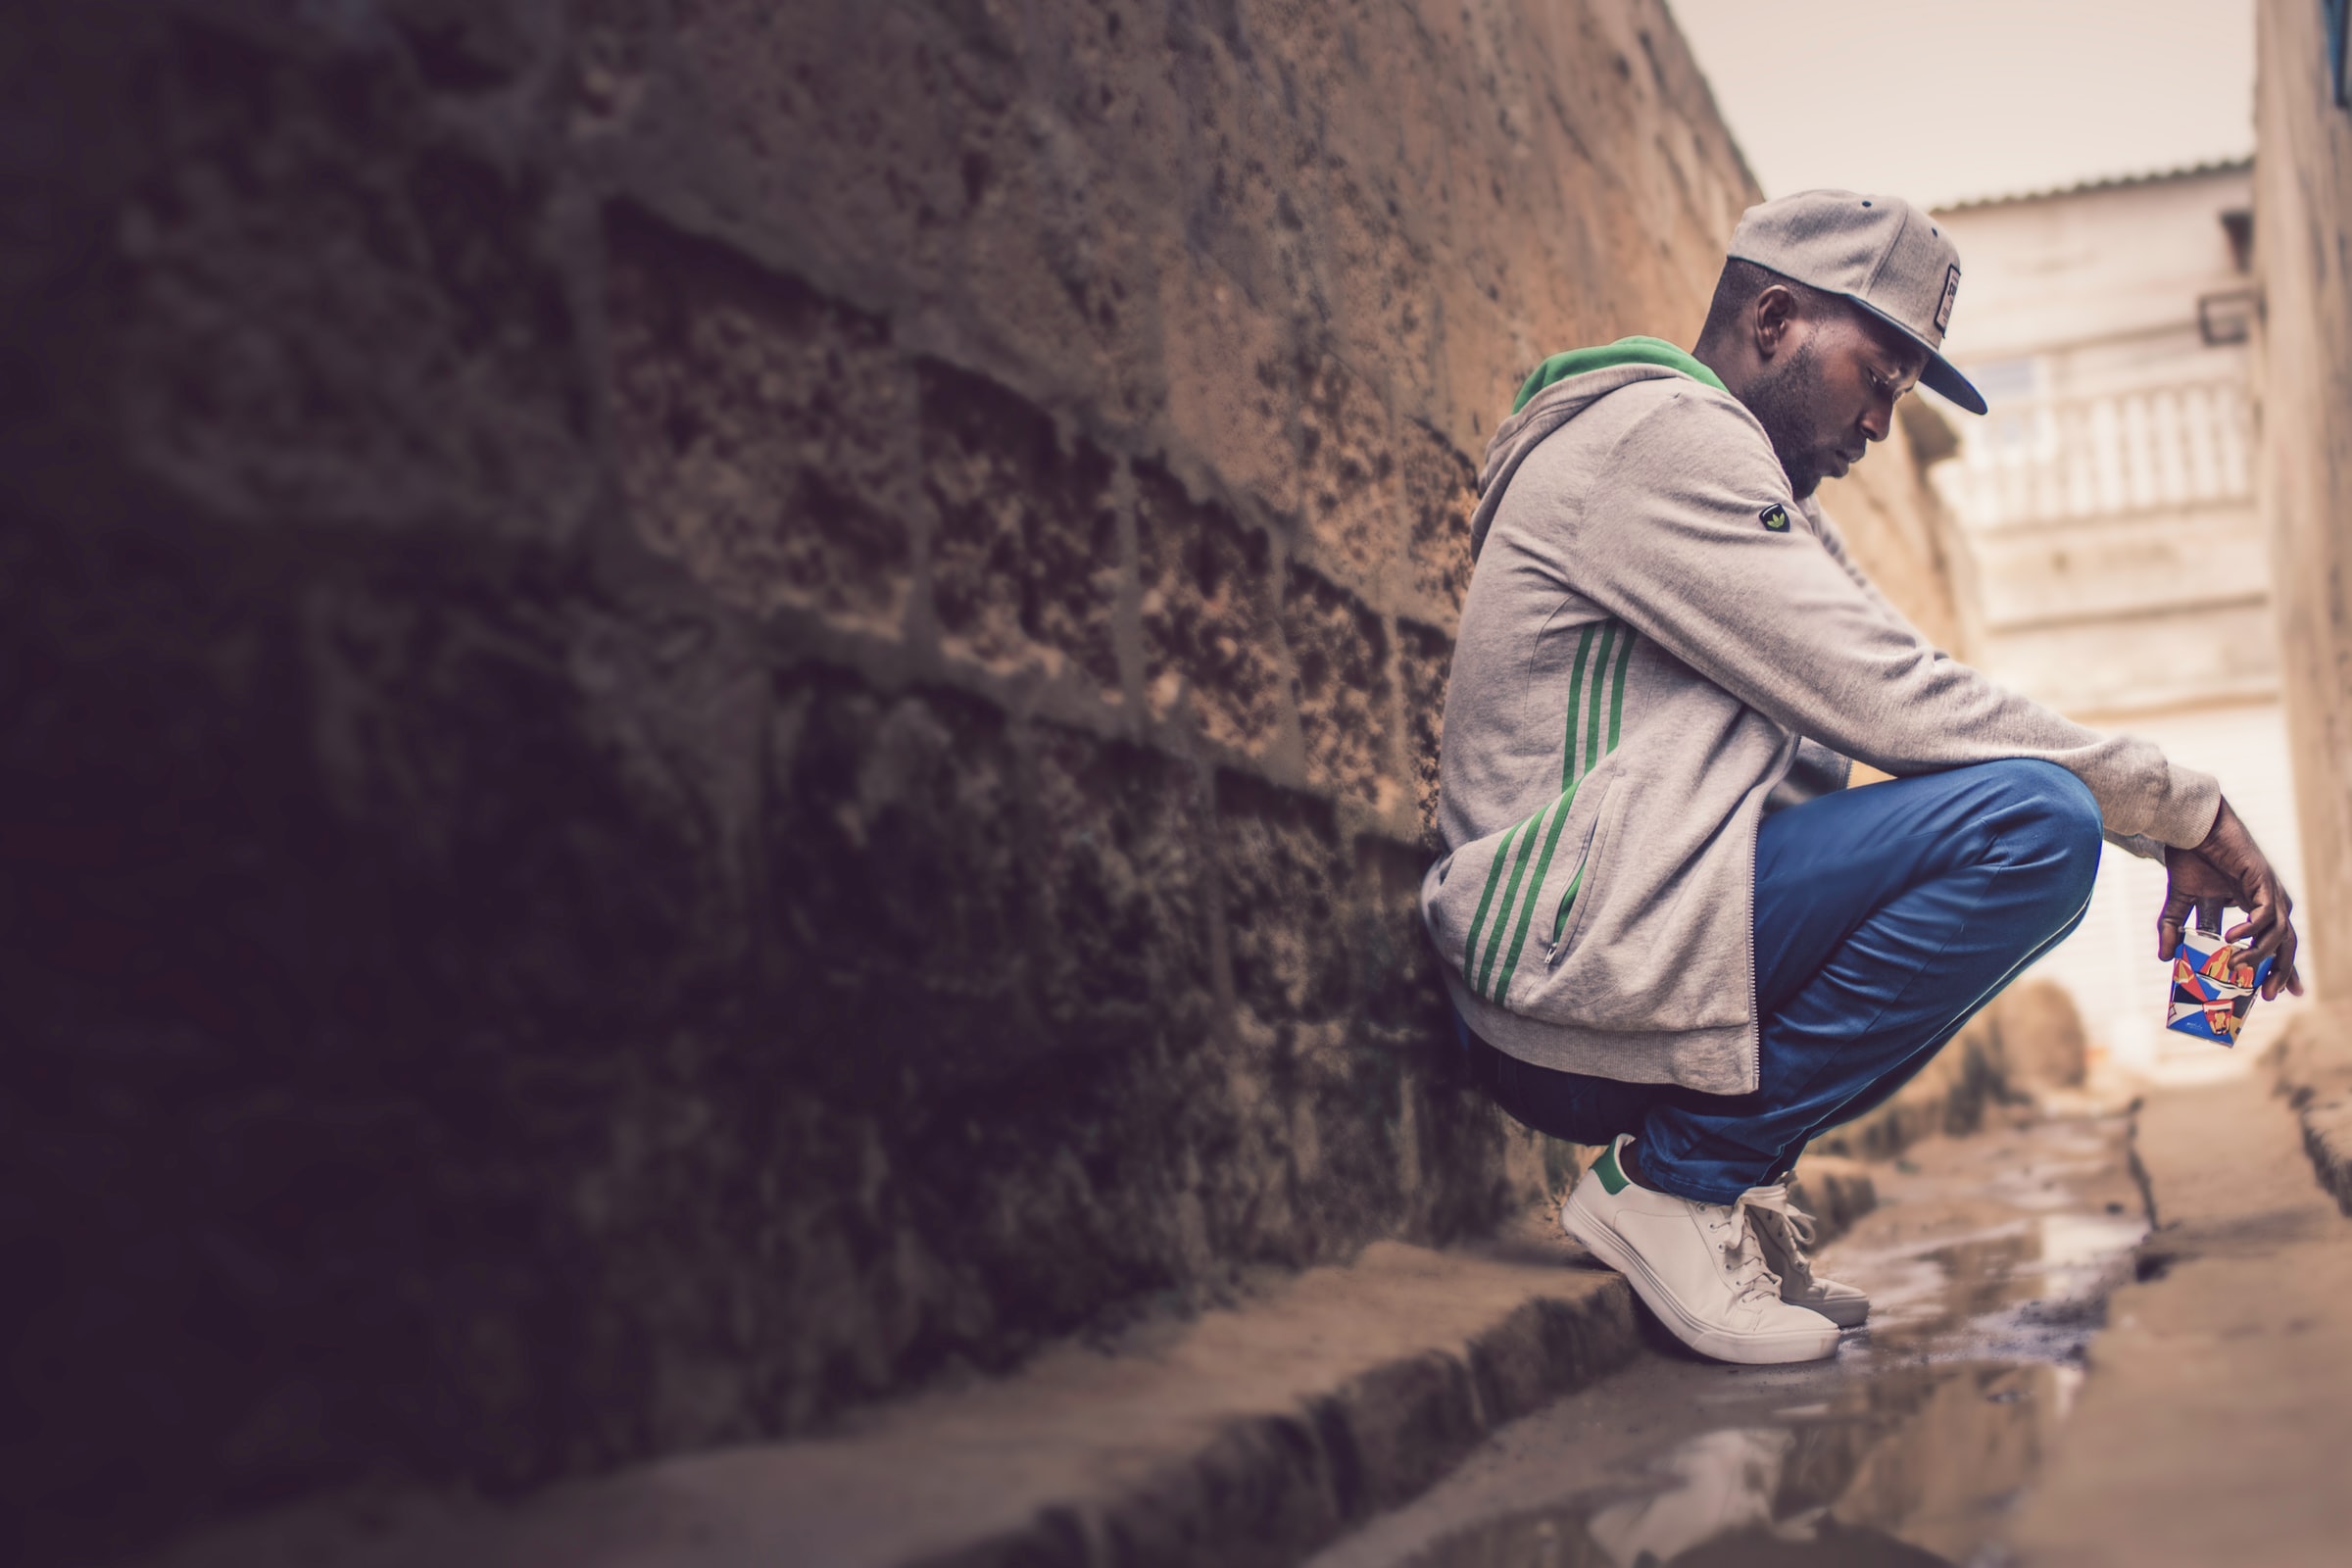 A black man wearing a tracksuit and cap squats down in an alleyway, appearing pensive